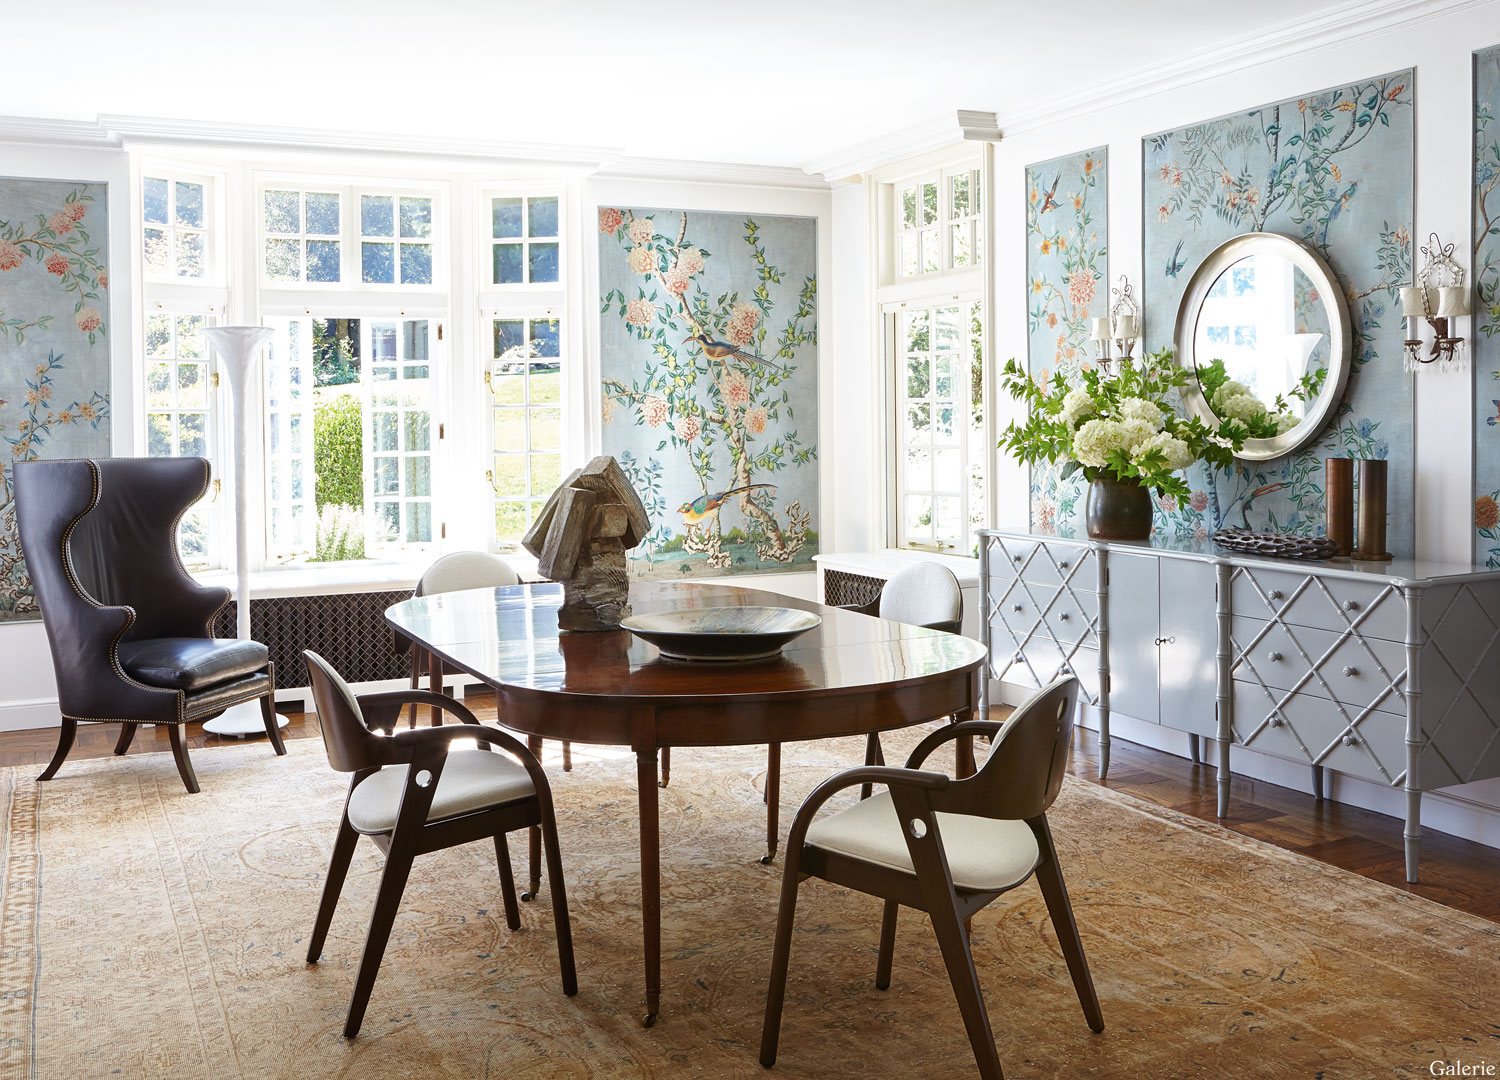 The Most Artful Dining Rooms from the Galerie Archives - Galerie